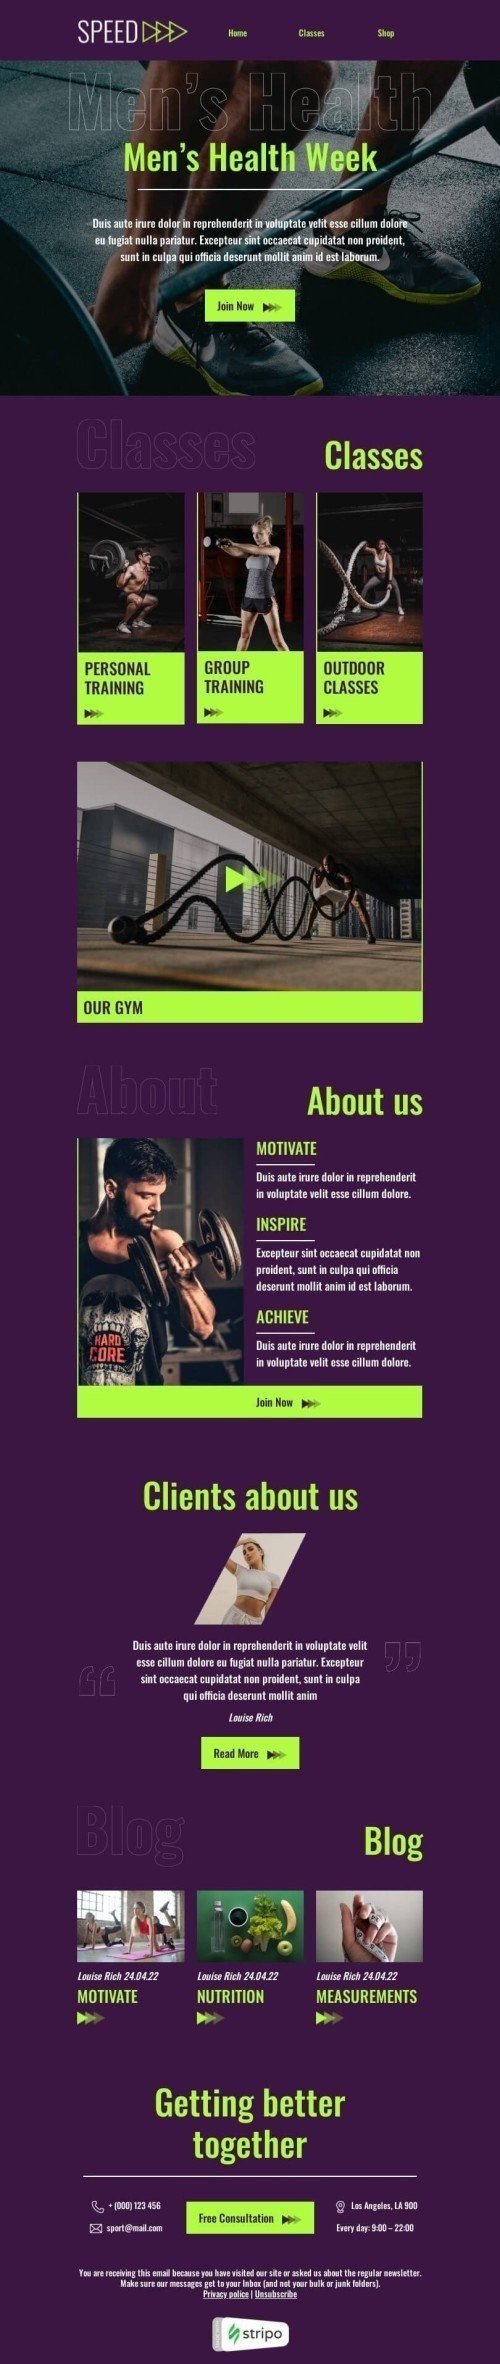 Men’s Health Week Email Template "Outdoor classes" for Sports industry desktop view